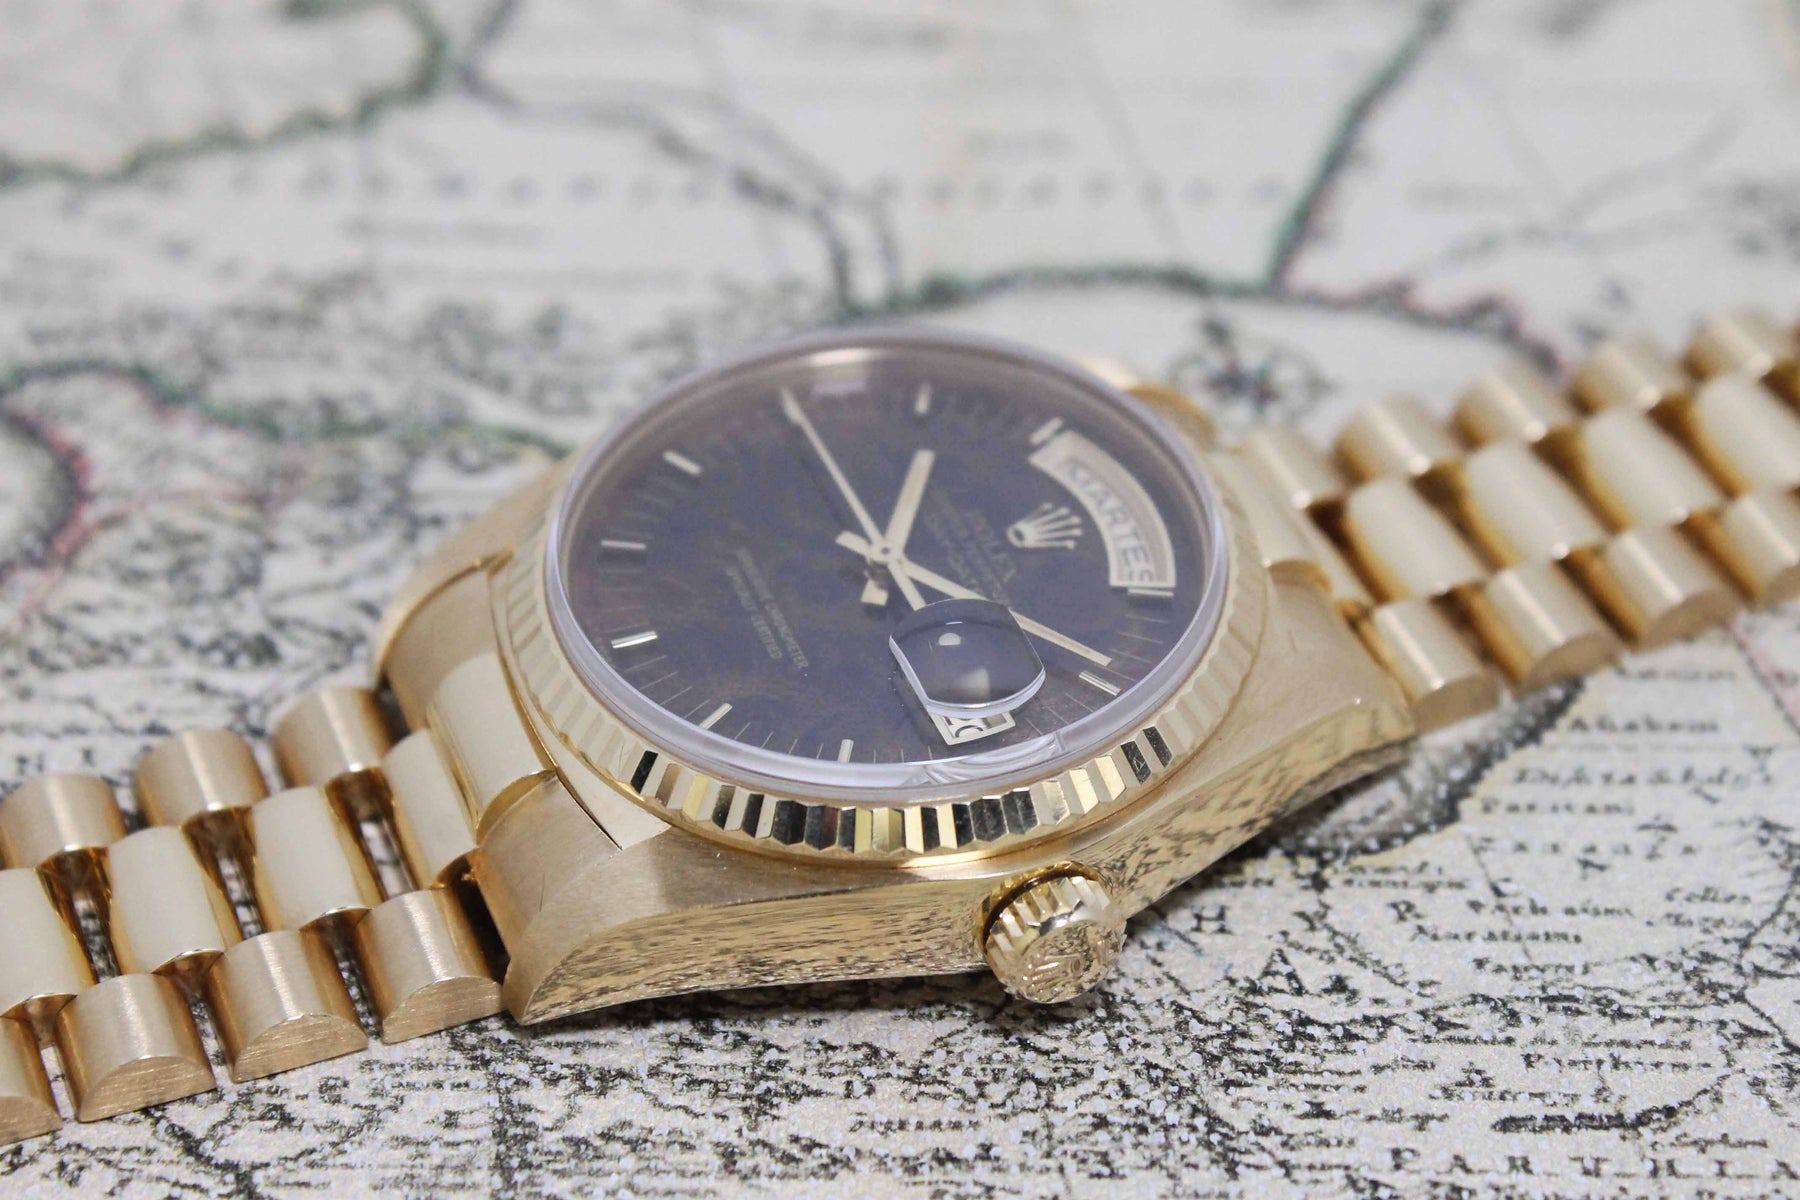 1980 Rolex Day Date 'Like New' with Burl Wood Dial Ref. 18038